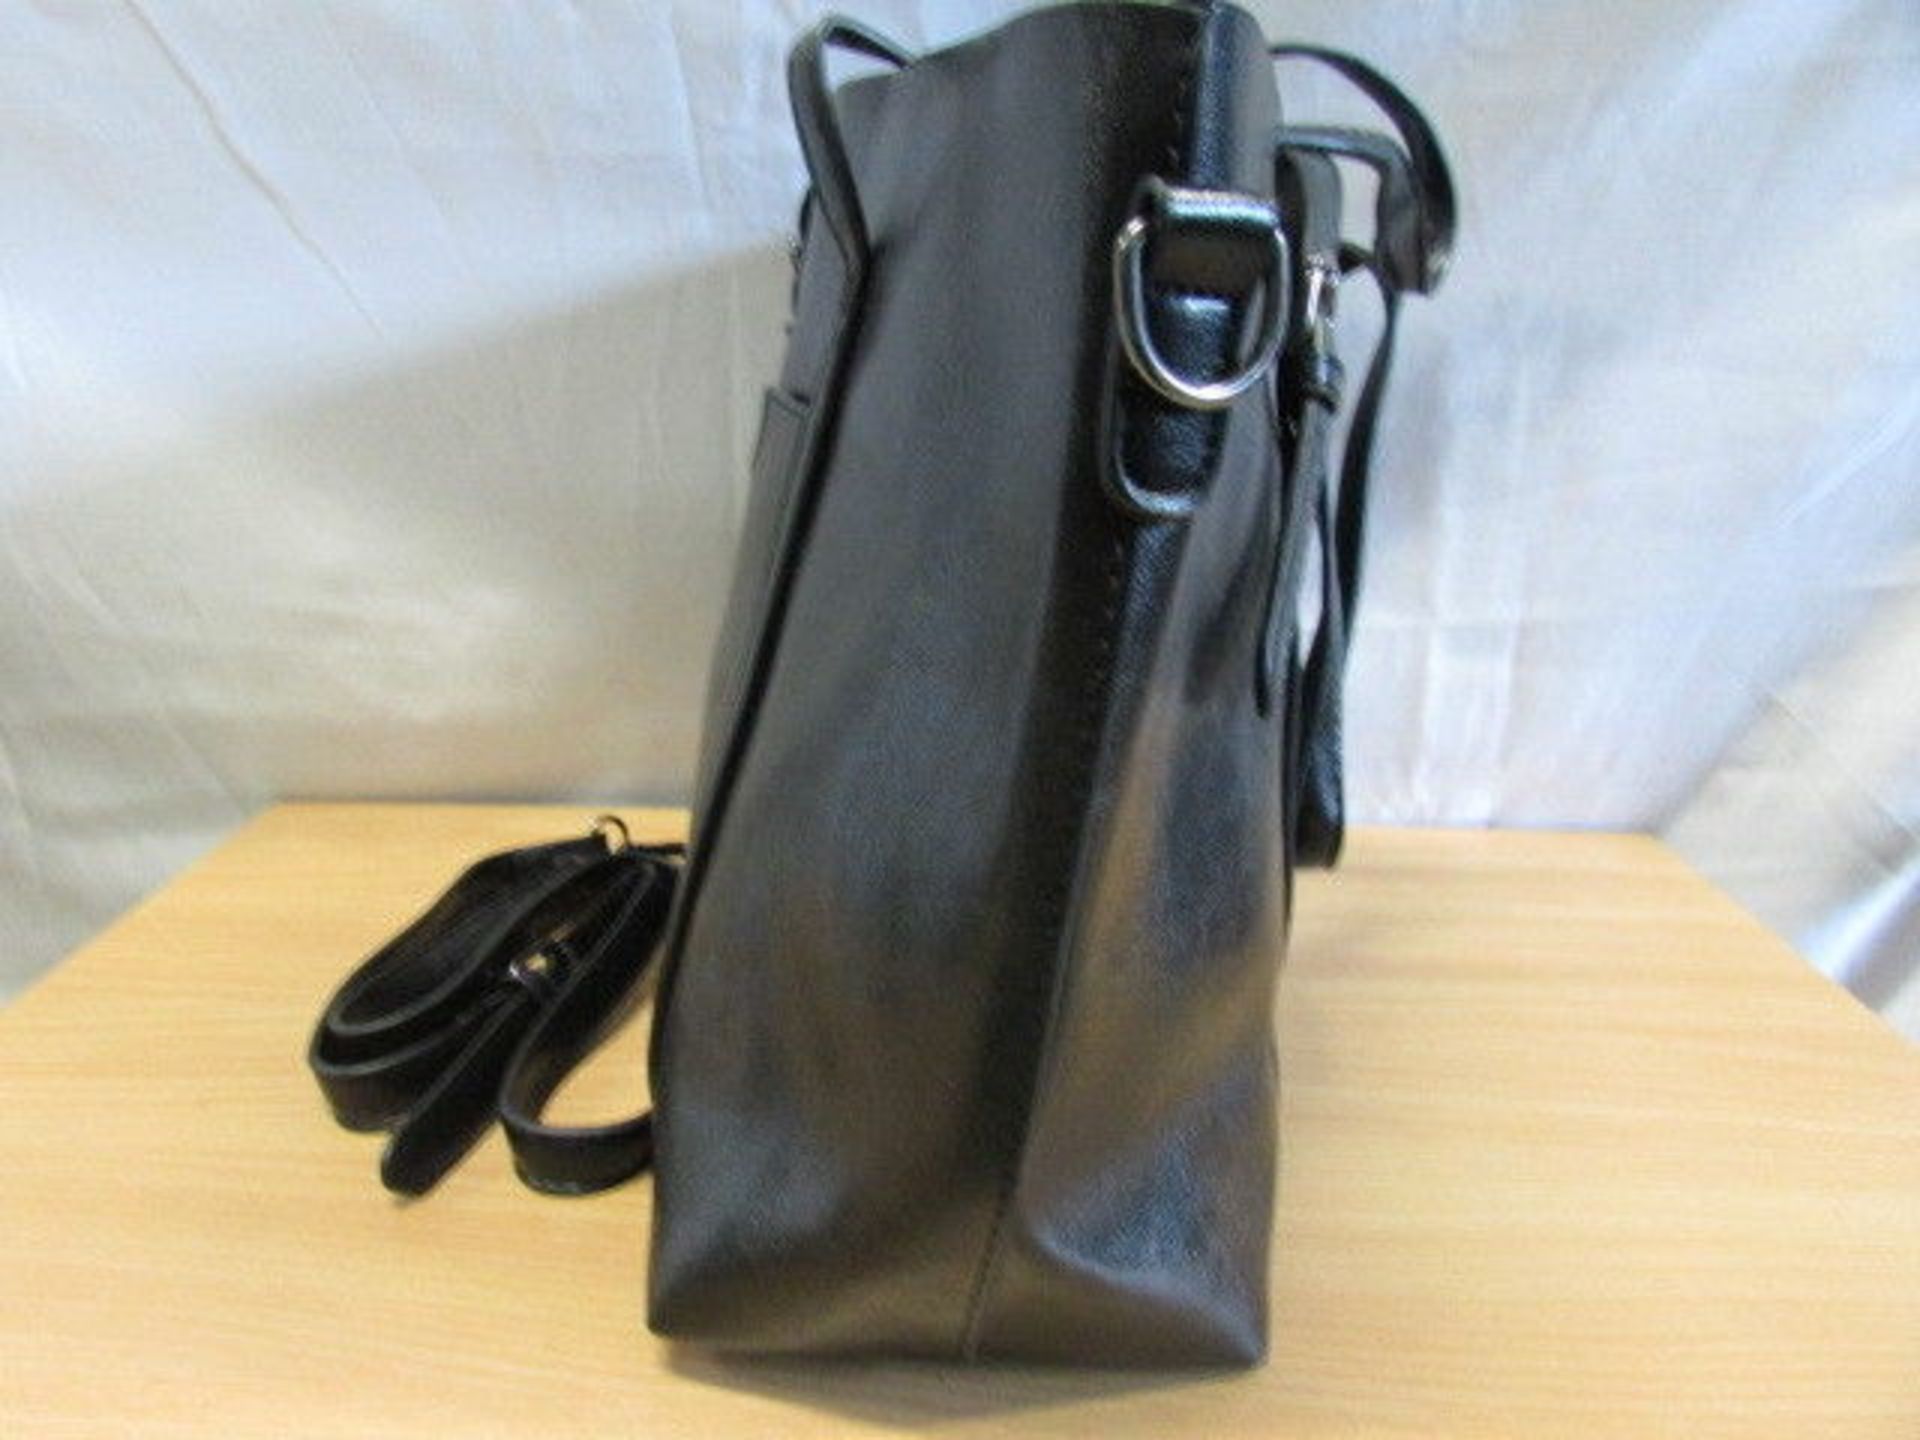 Black Everyday Tote (New Without Tags) [Ref: Mi-Tub 5]-Mi - Image 3 of 4